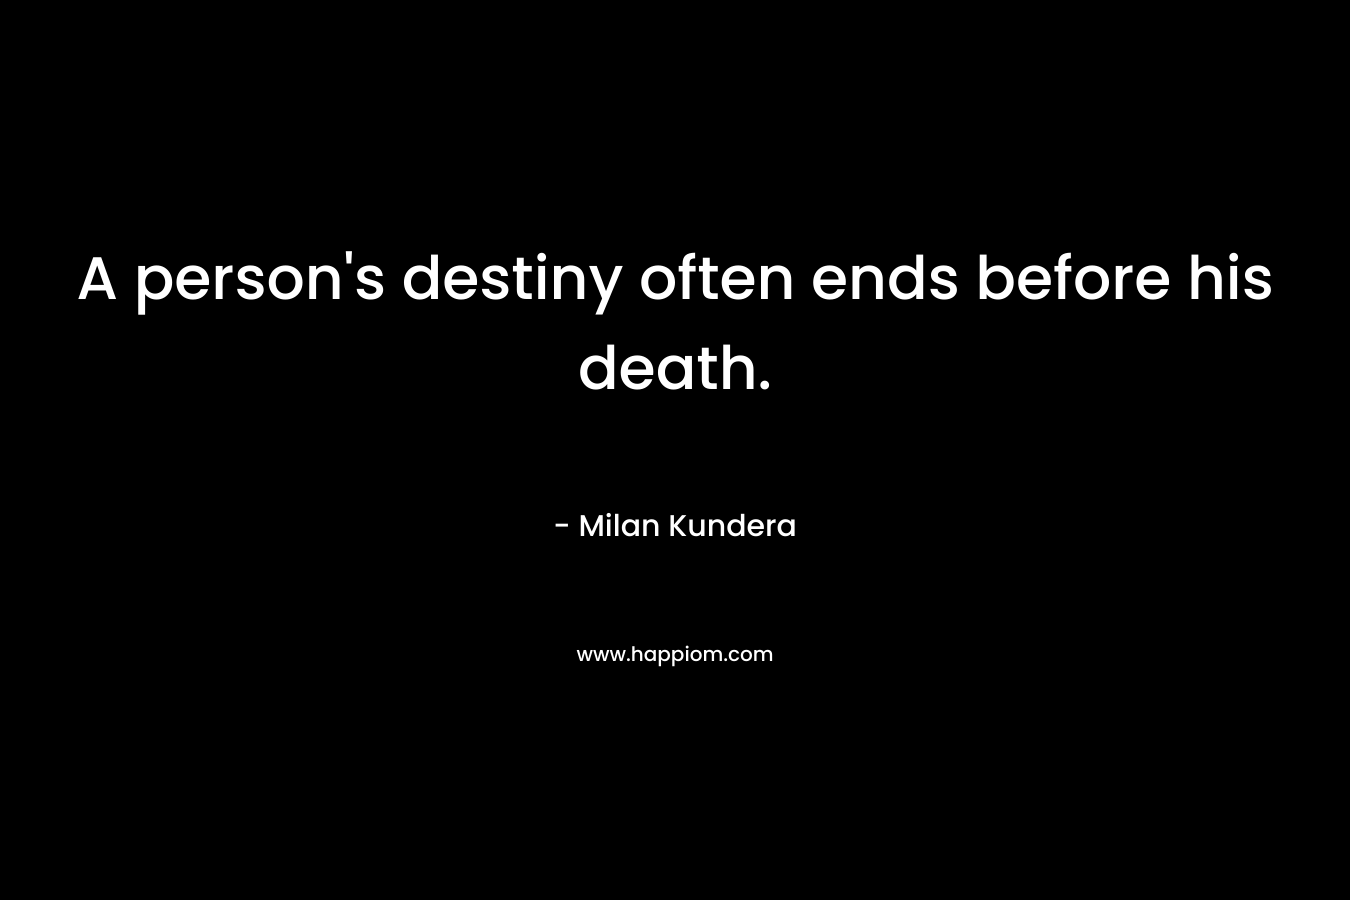 A person's destiny often ends before his death.